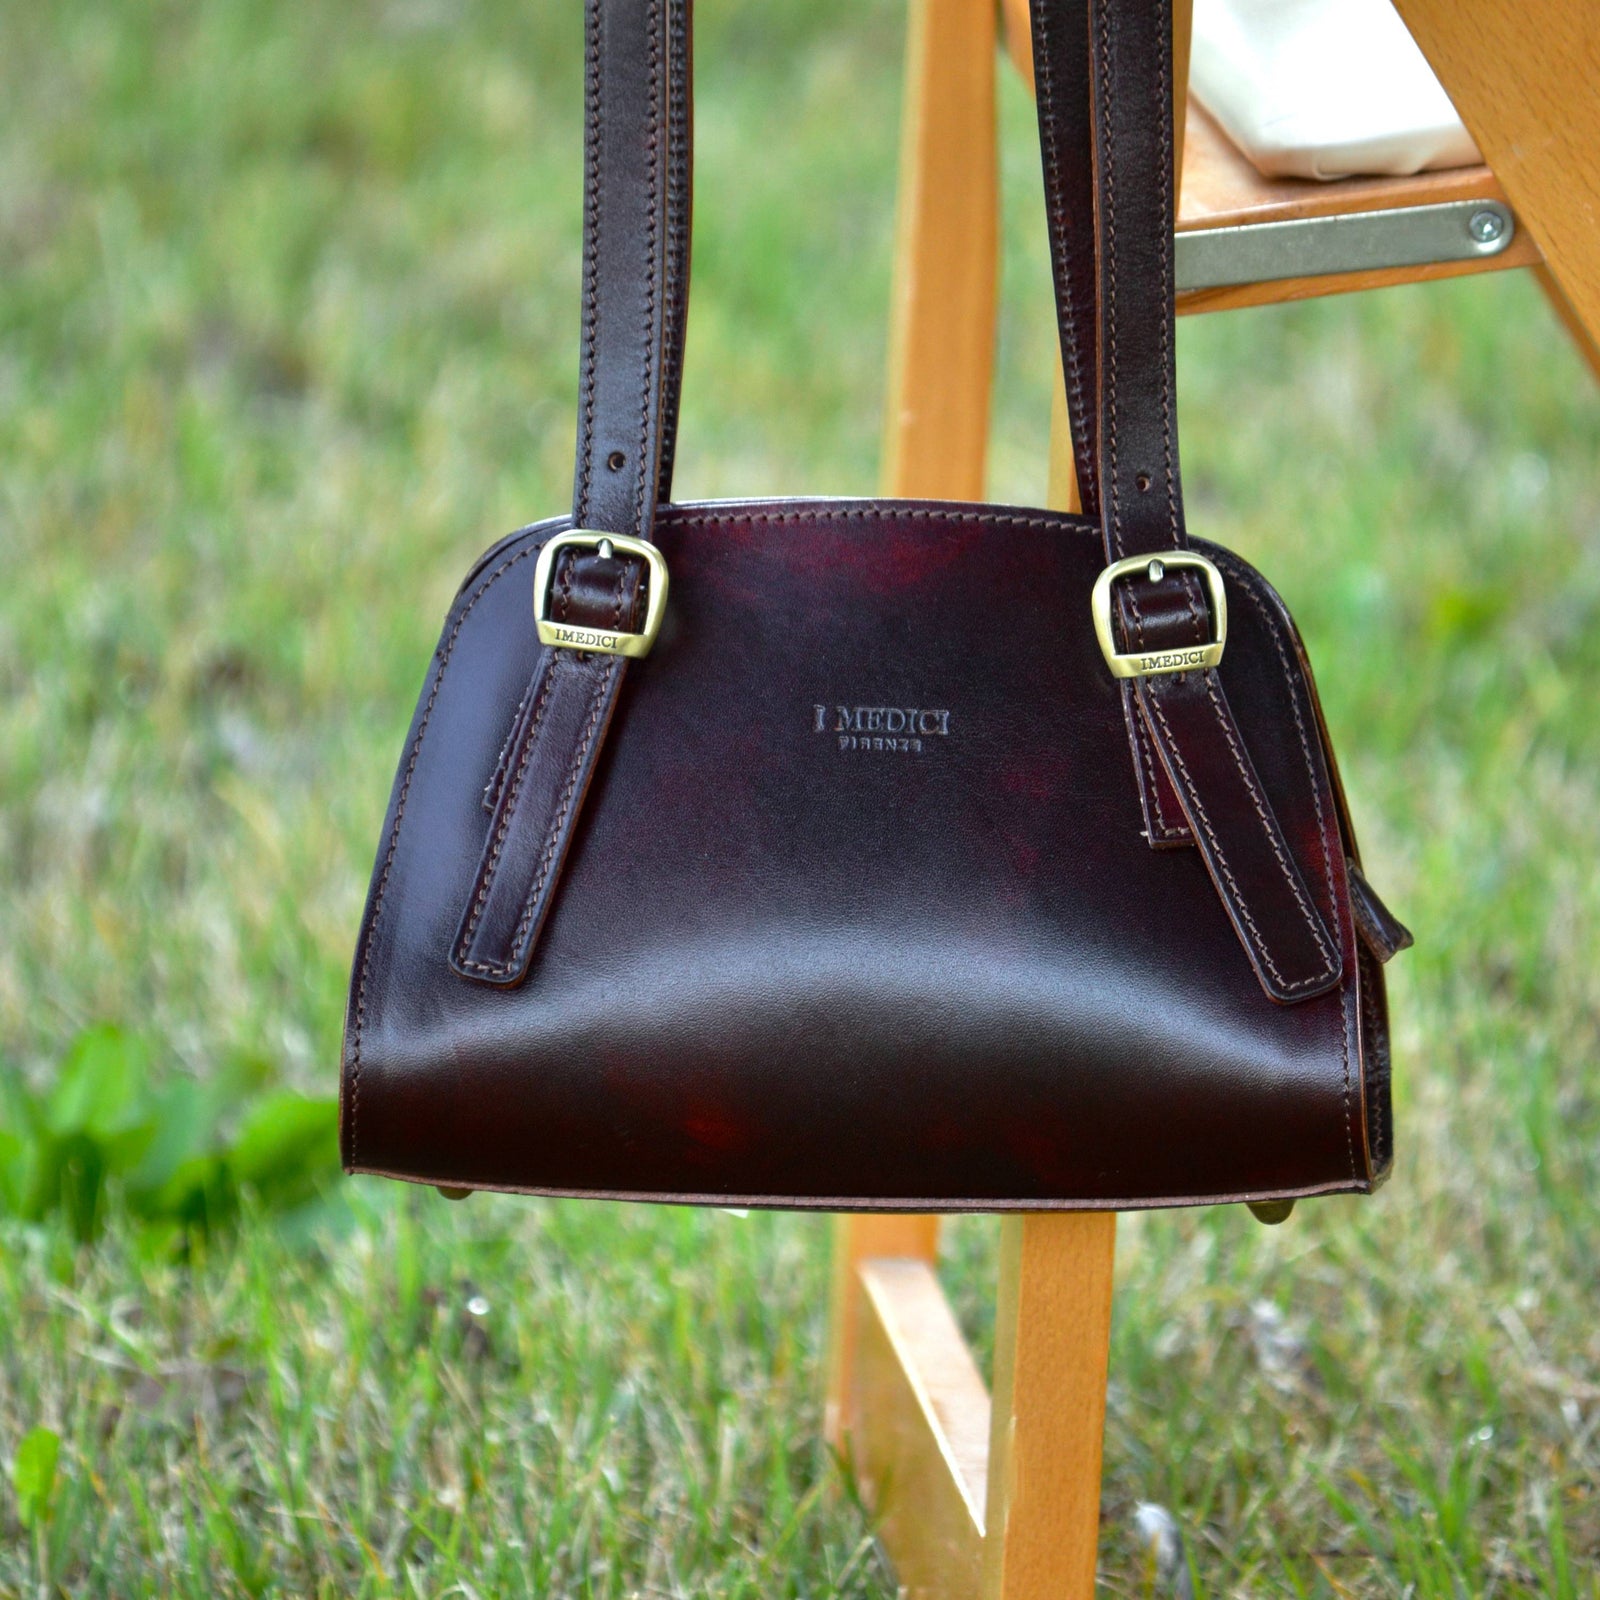 Italian Leather Bags Online  genuine leather bags and accessories